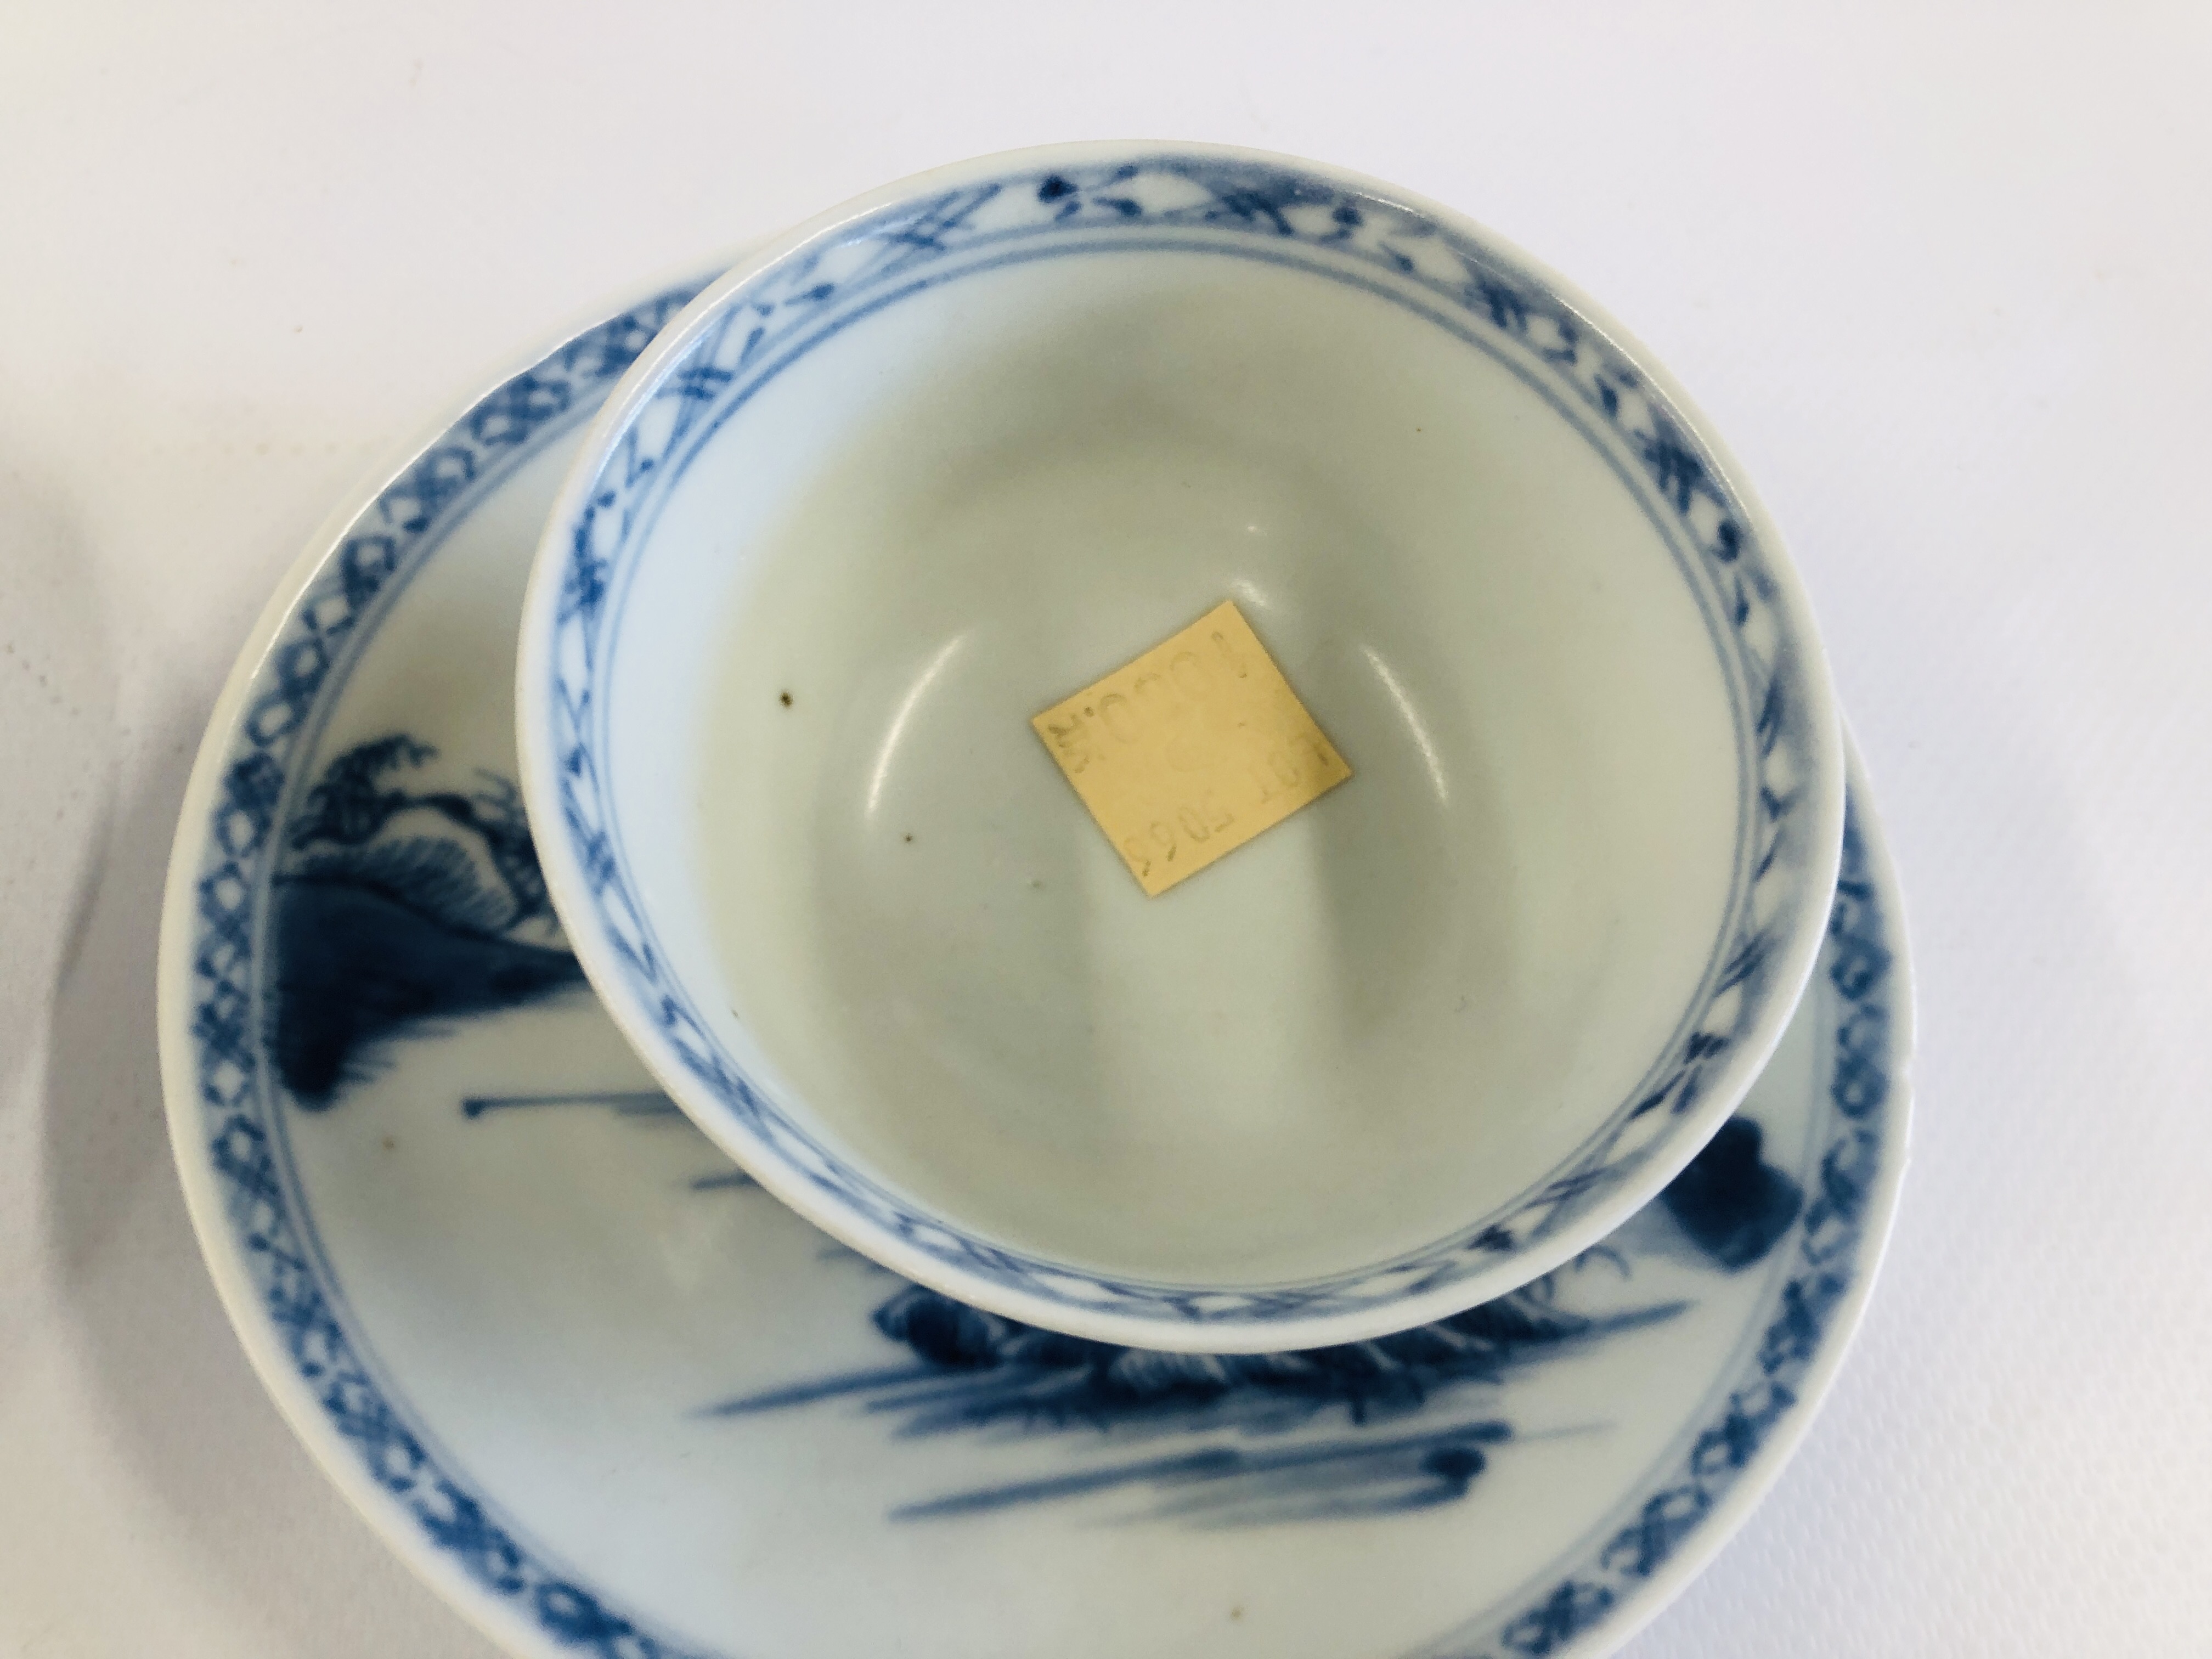 A NANKING CARGO ORIENTAL BLUE & WHITE TEA BOWL AND SAUCER (CHRISTIES 5066) ALONG WITH A LASKILL, - Image 3 of 8